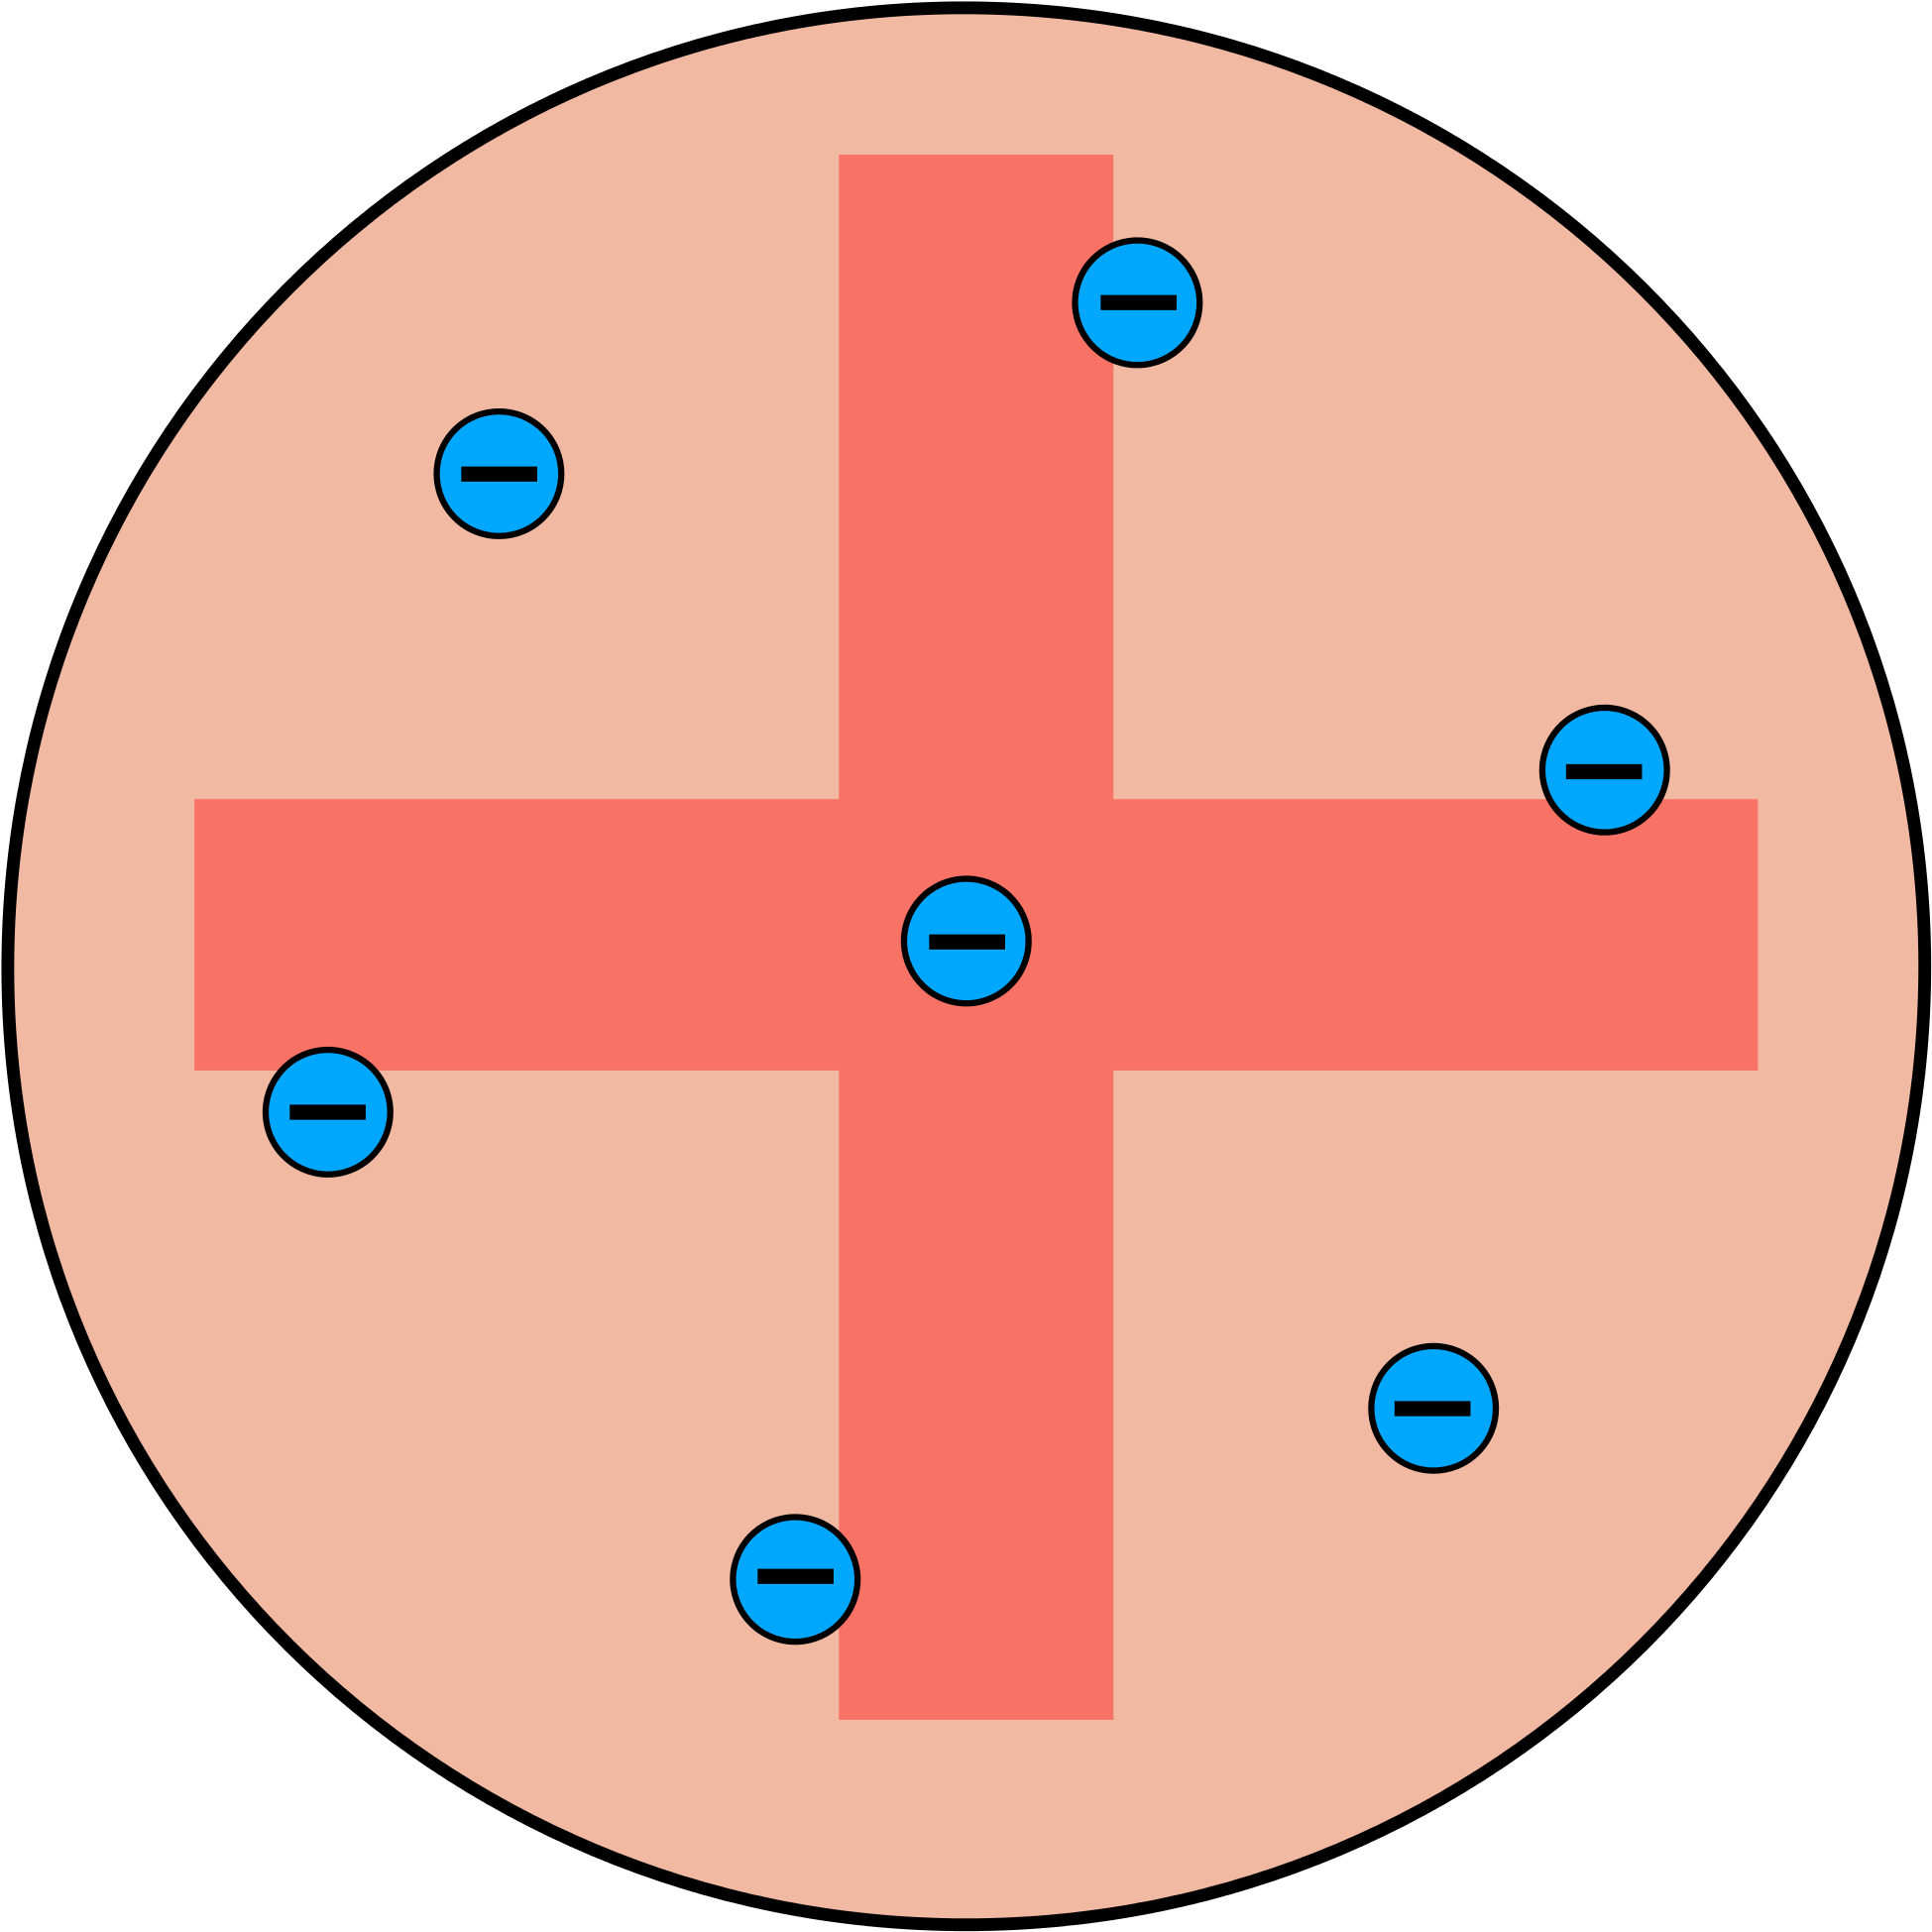 A Circular Object With Blue Circles And A Cross